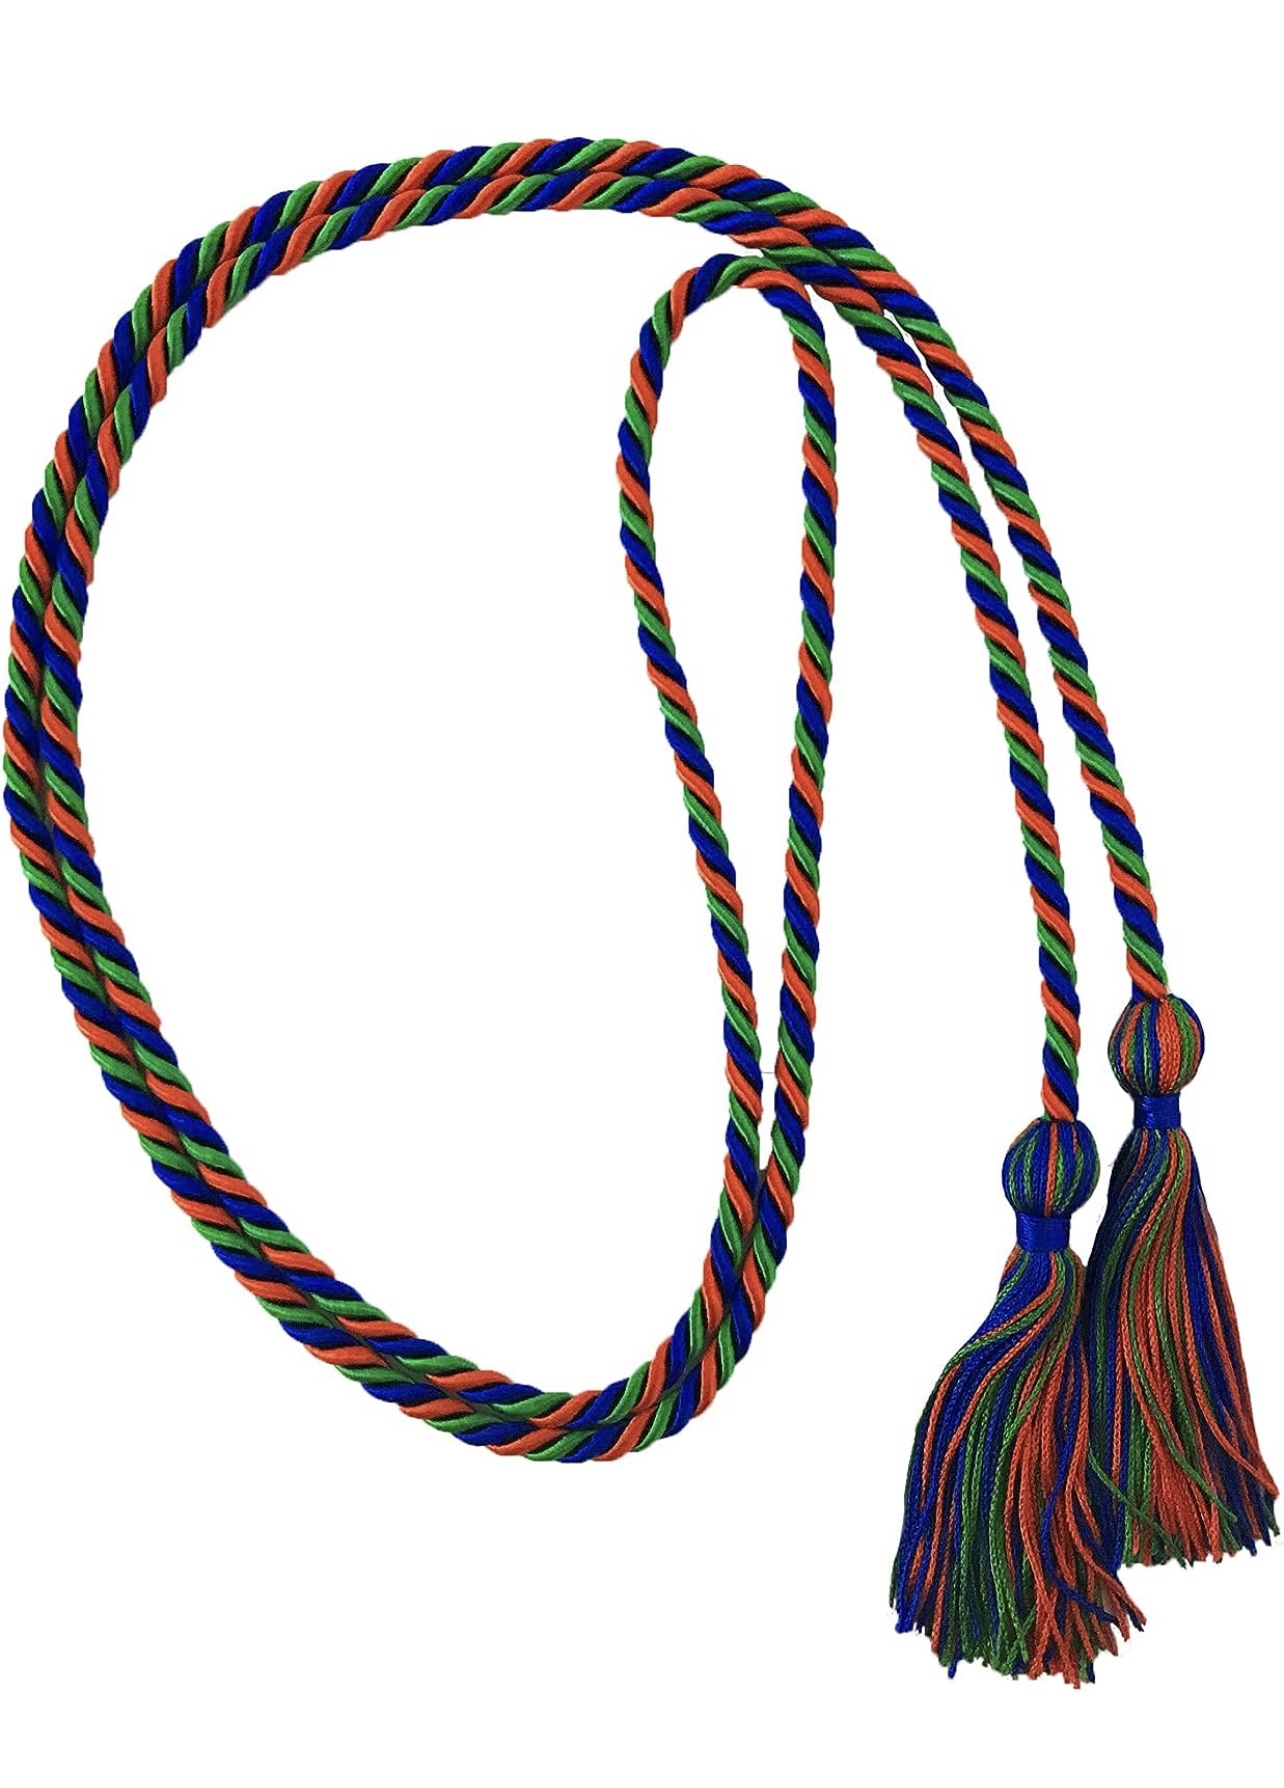 Green, blue, and red braided cord